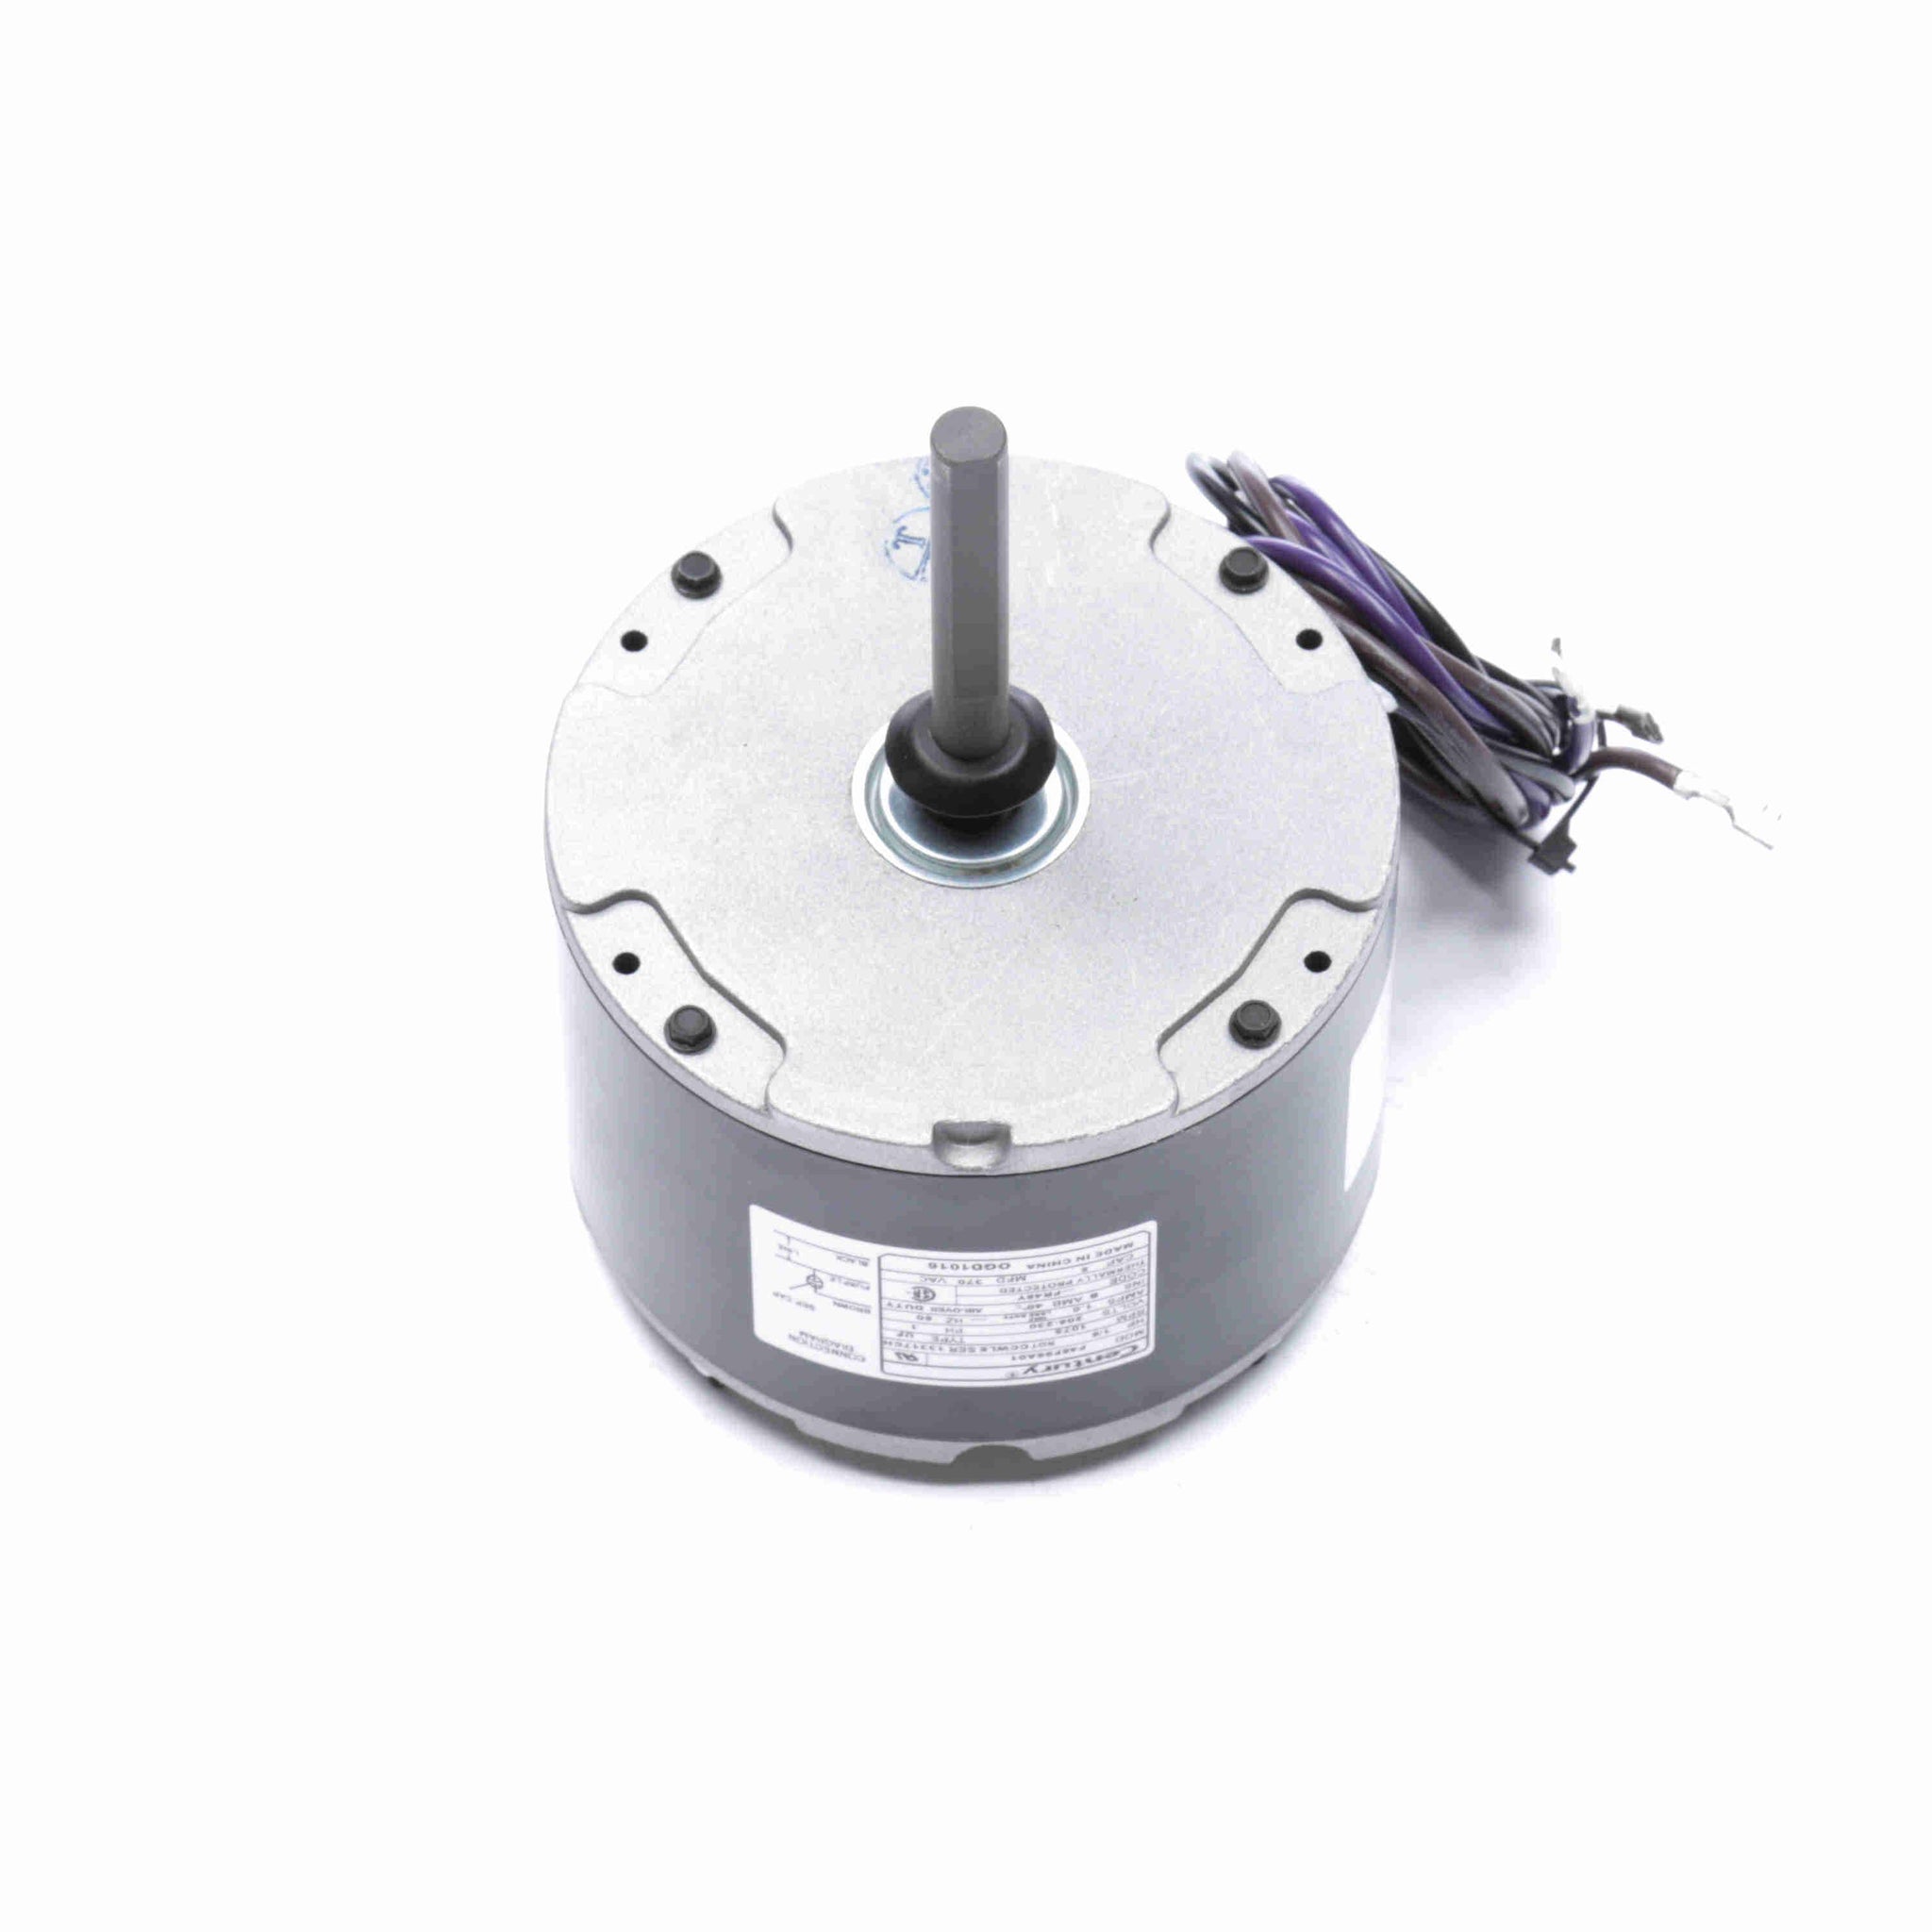 OGD1016 - 1/6 HP OEM Replacement Motor, 1075 RPM, 208-230 Volts, 48 Frame, TEAO - Hardware & Moreee